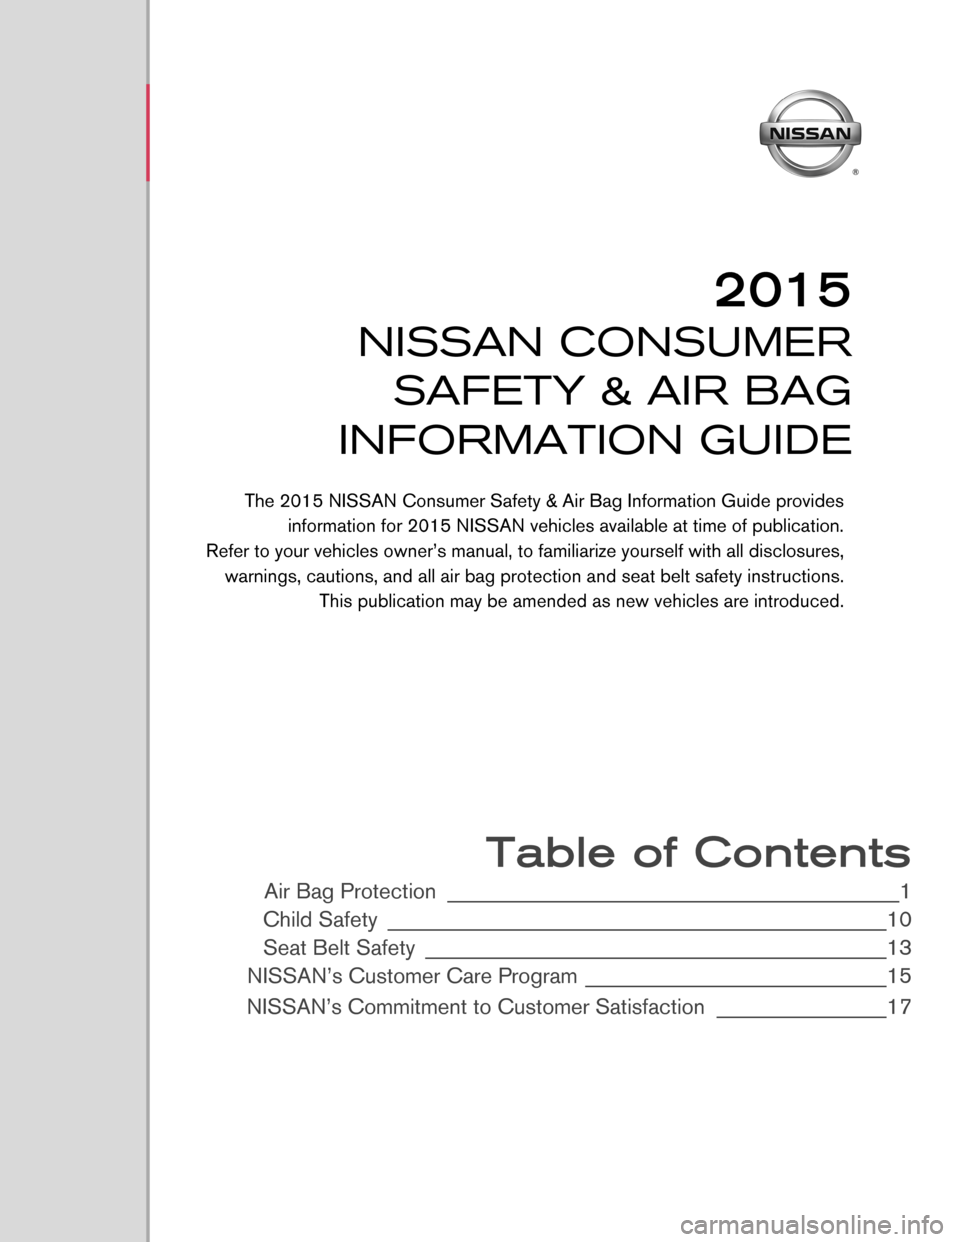 NISSAN 370Z ROADSTER 2015 Z34 Consumer Safety Air Bag Information Guide 